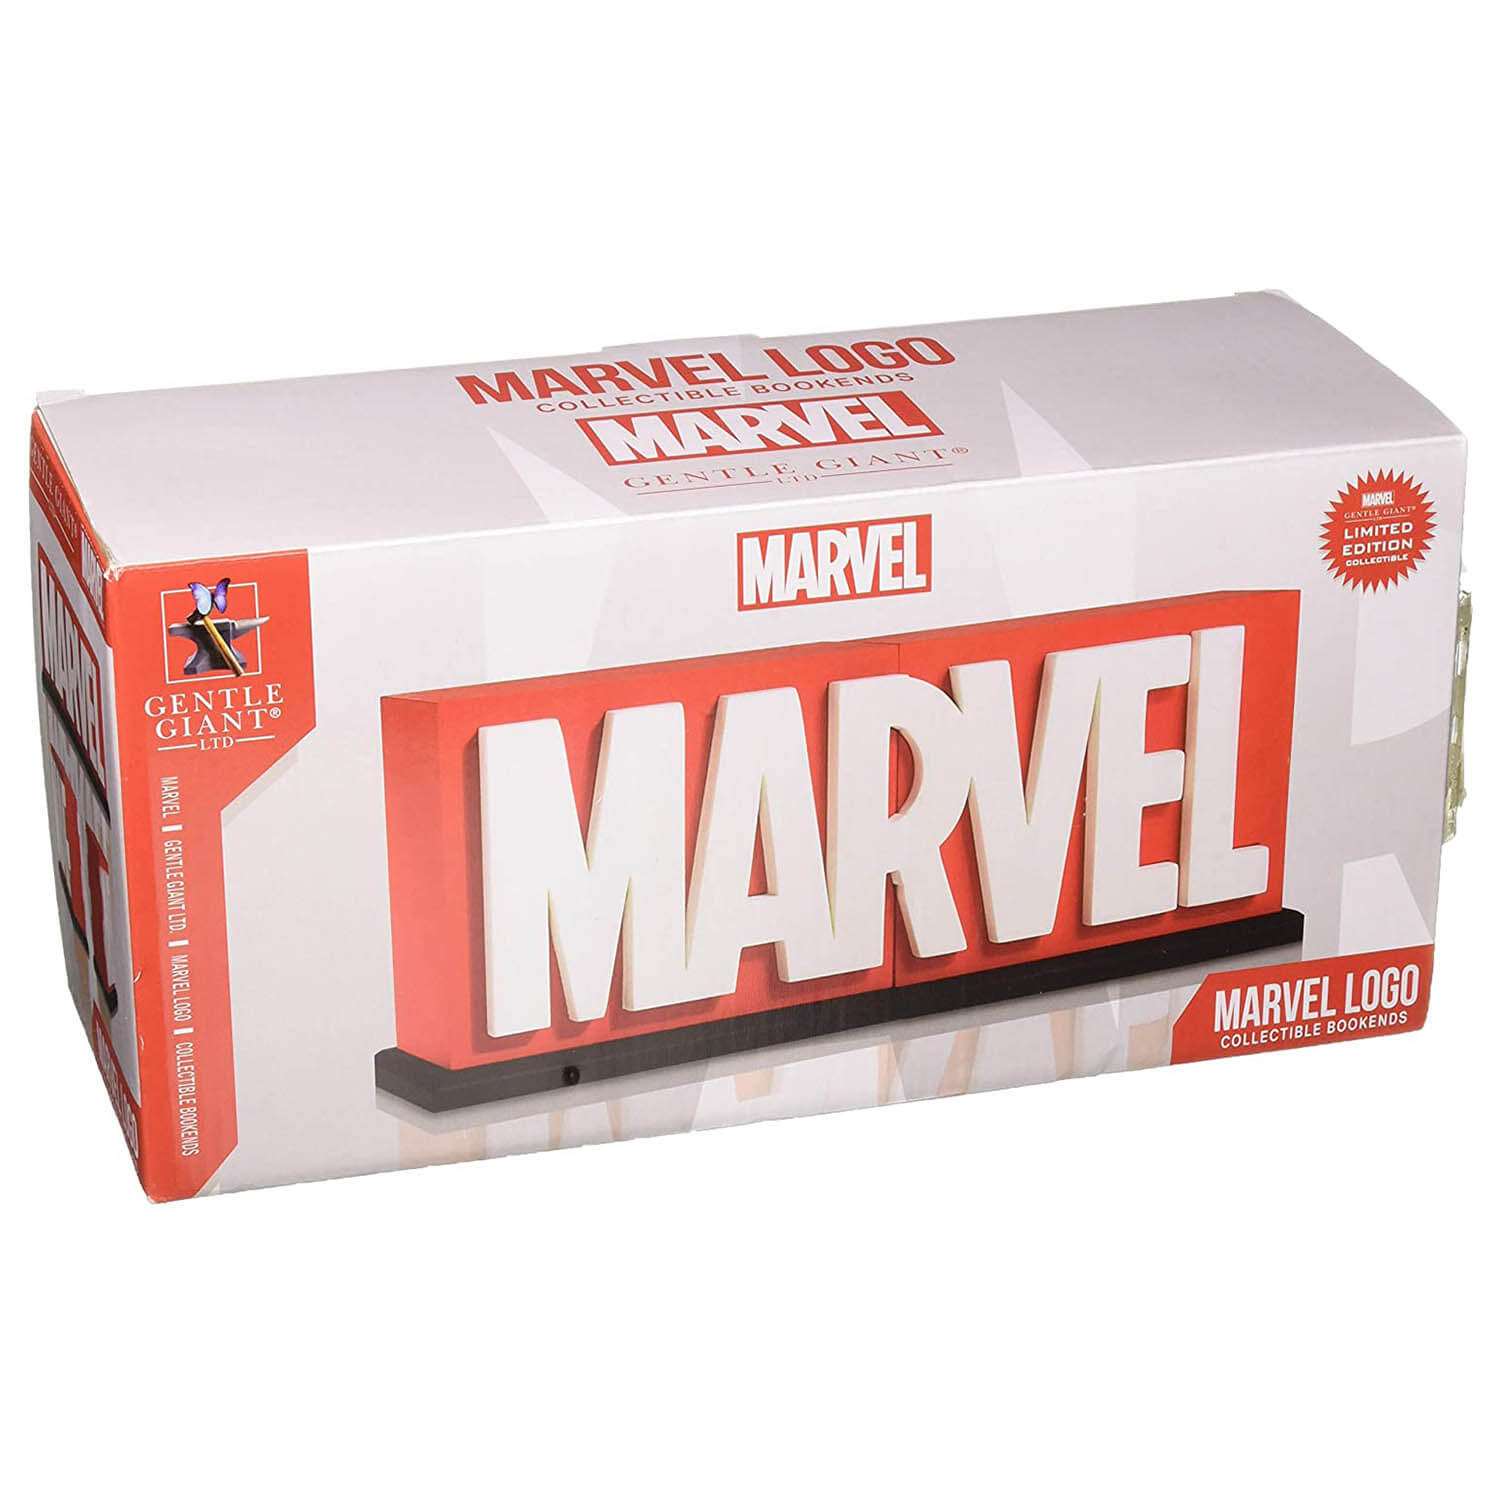 Front view of the Gentle Giant Marvel Logo Collectible Bookends Limited Edition package.